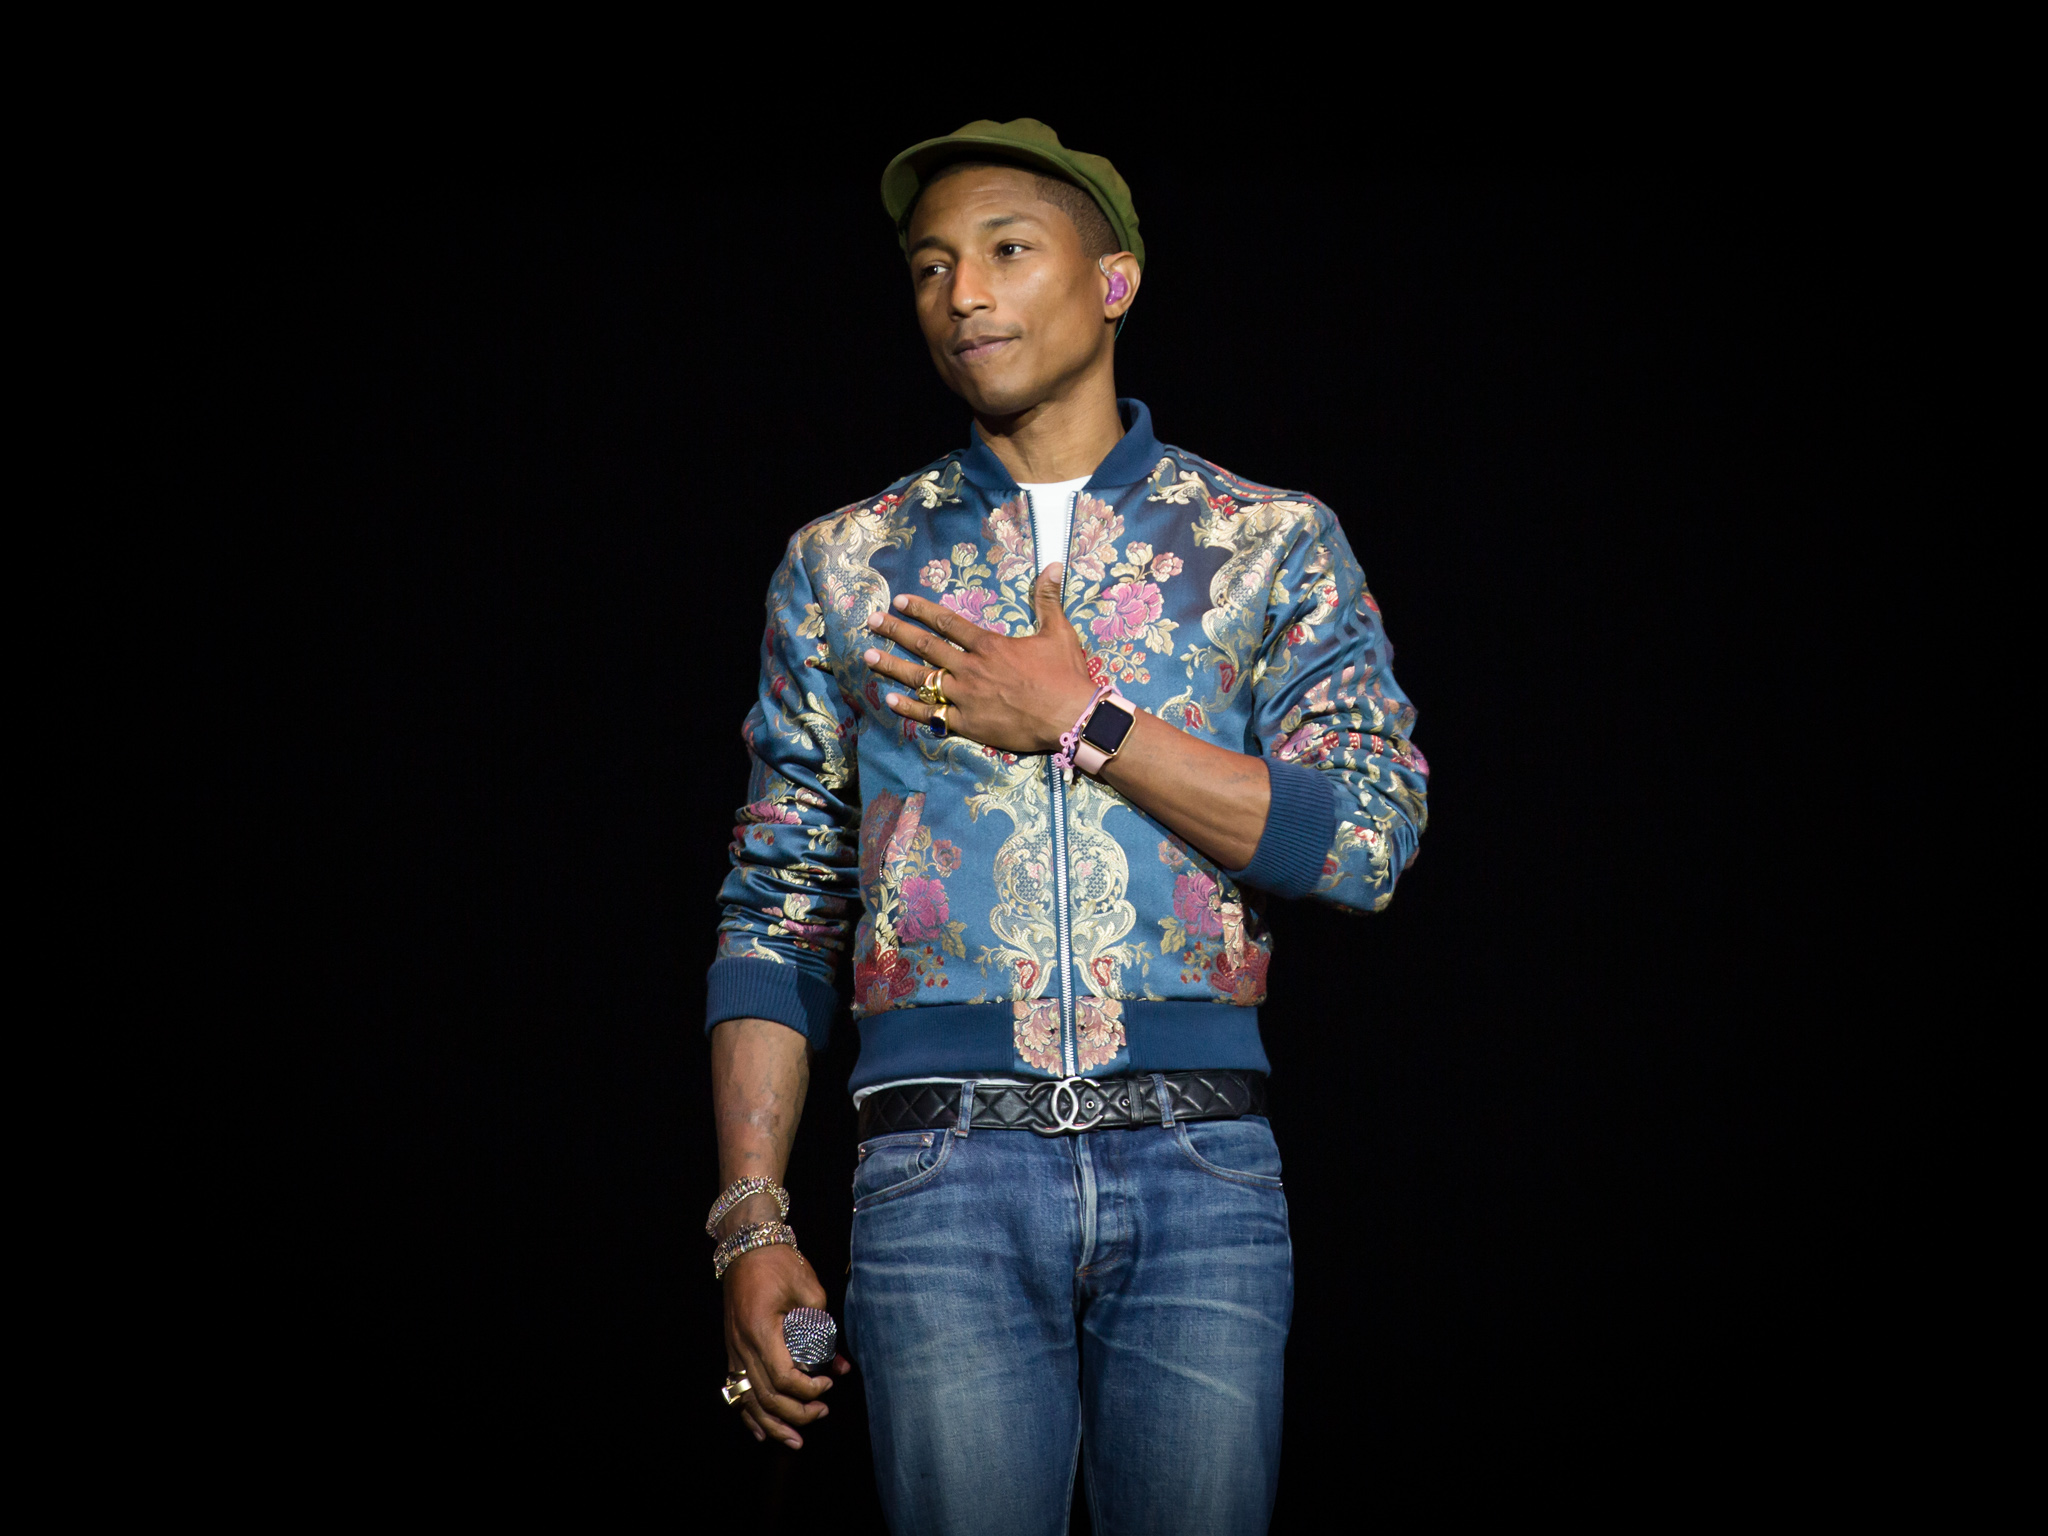 Pharell Williams by Bullet-ray Photography